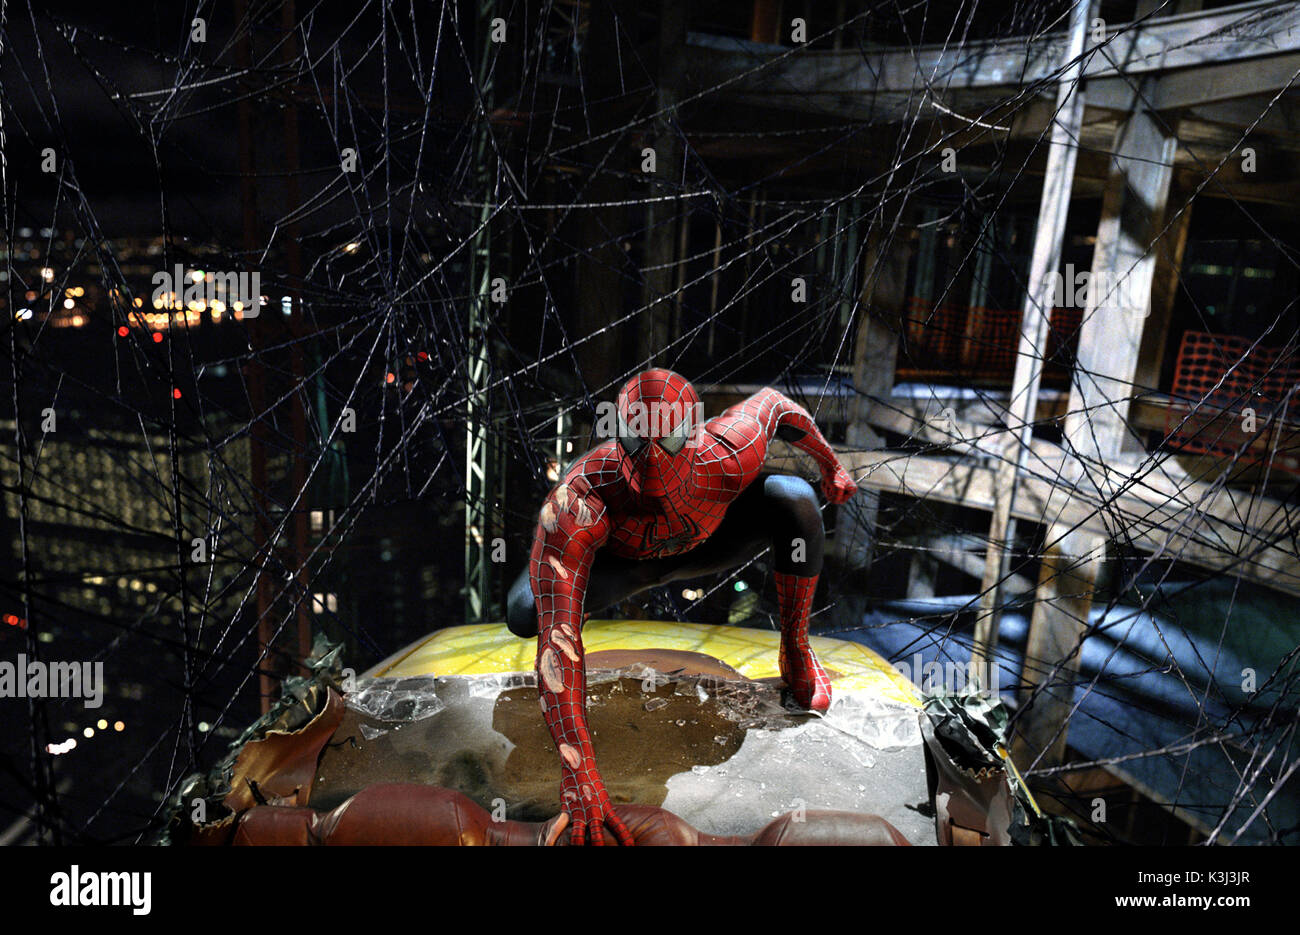 SPIDER-MAN 3 Tobey Maguire come Peter Parker / Spider-man data: 2007 Foto Stock